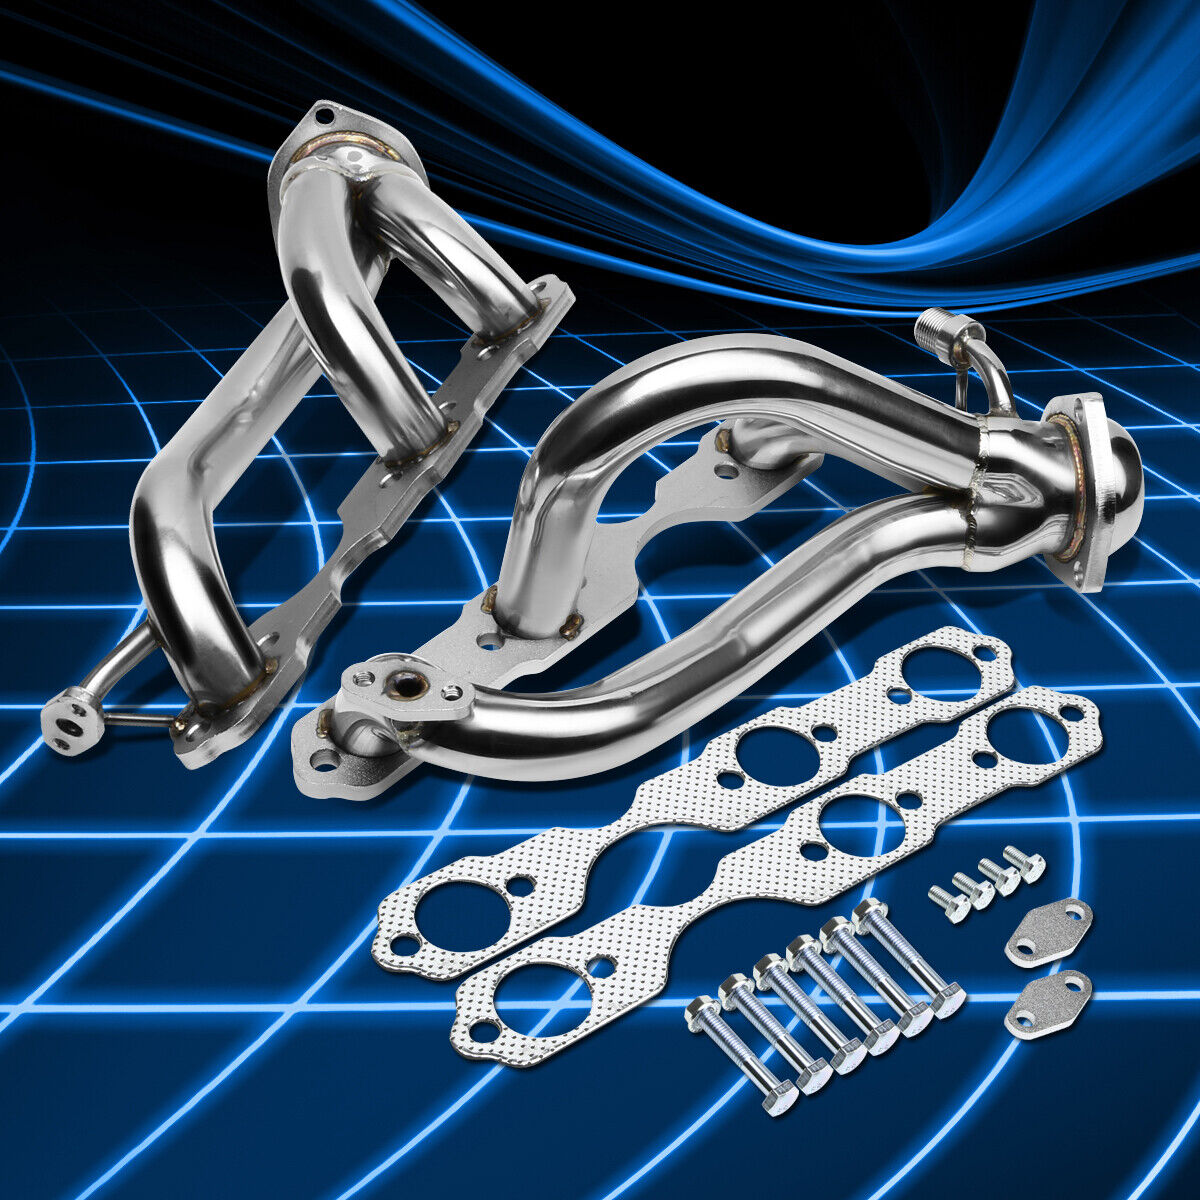 For S10/Blazer/Sonoma/Jimmy 4.3 V6 4WD 2 X 3-1 Stainless Header Manifold Exhaust